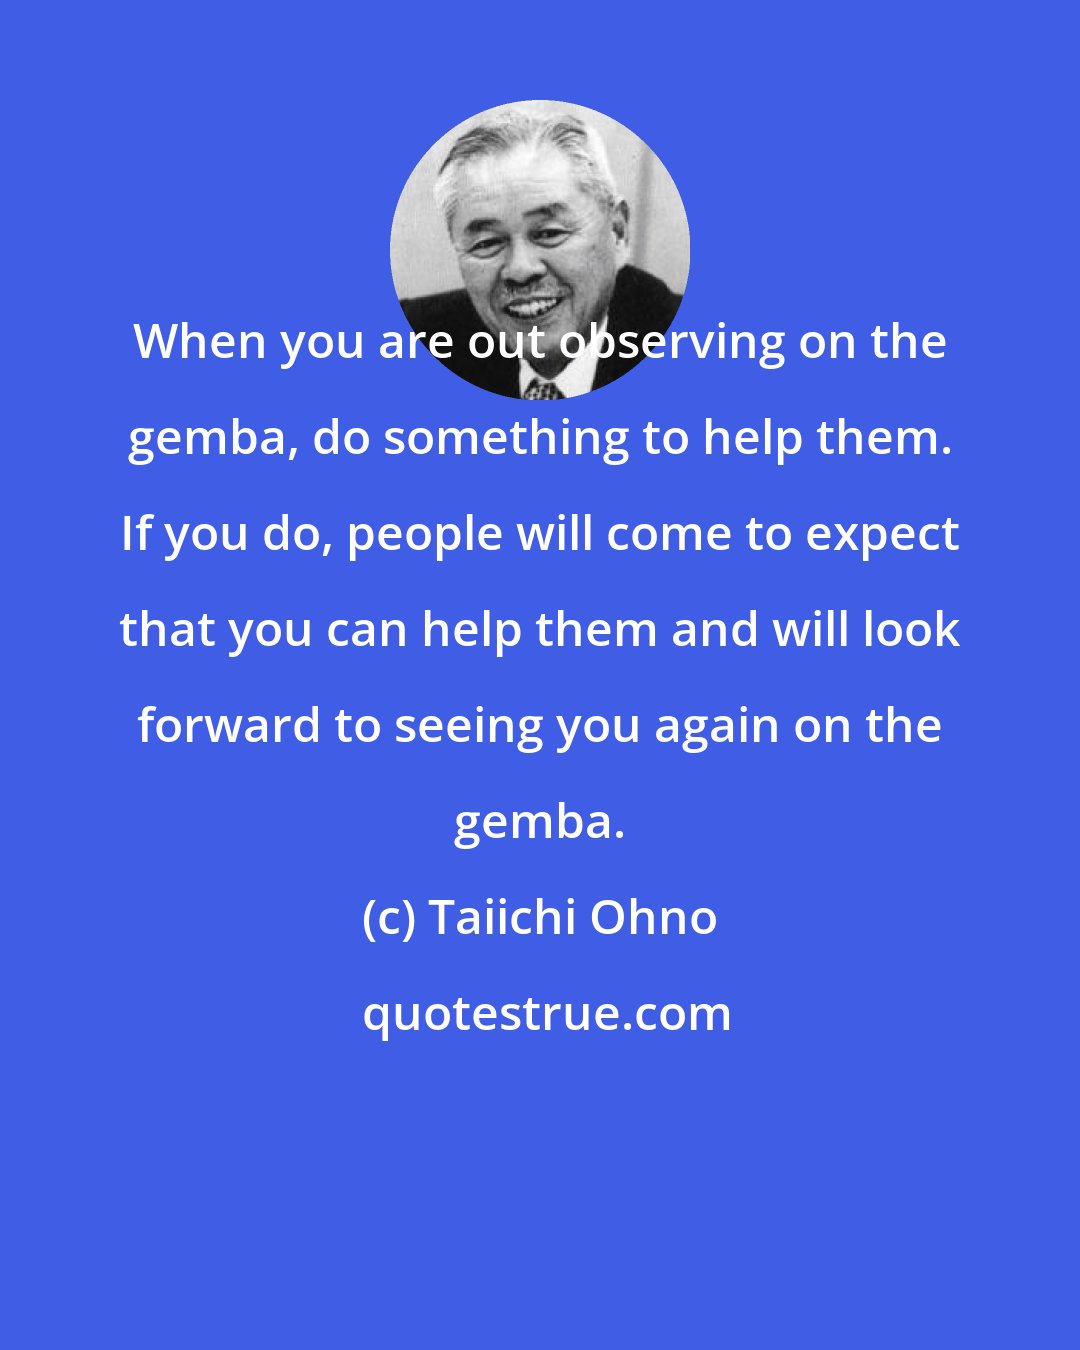 Taiichi Ohno: When you are out observing on the gemba, do something to help them. If you do, people will come to expect that you can help them and will look forward to seeing you again on the gemba.